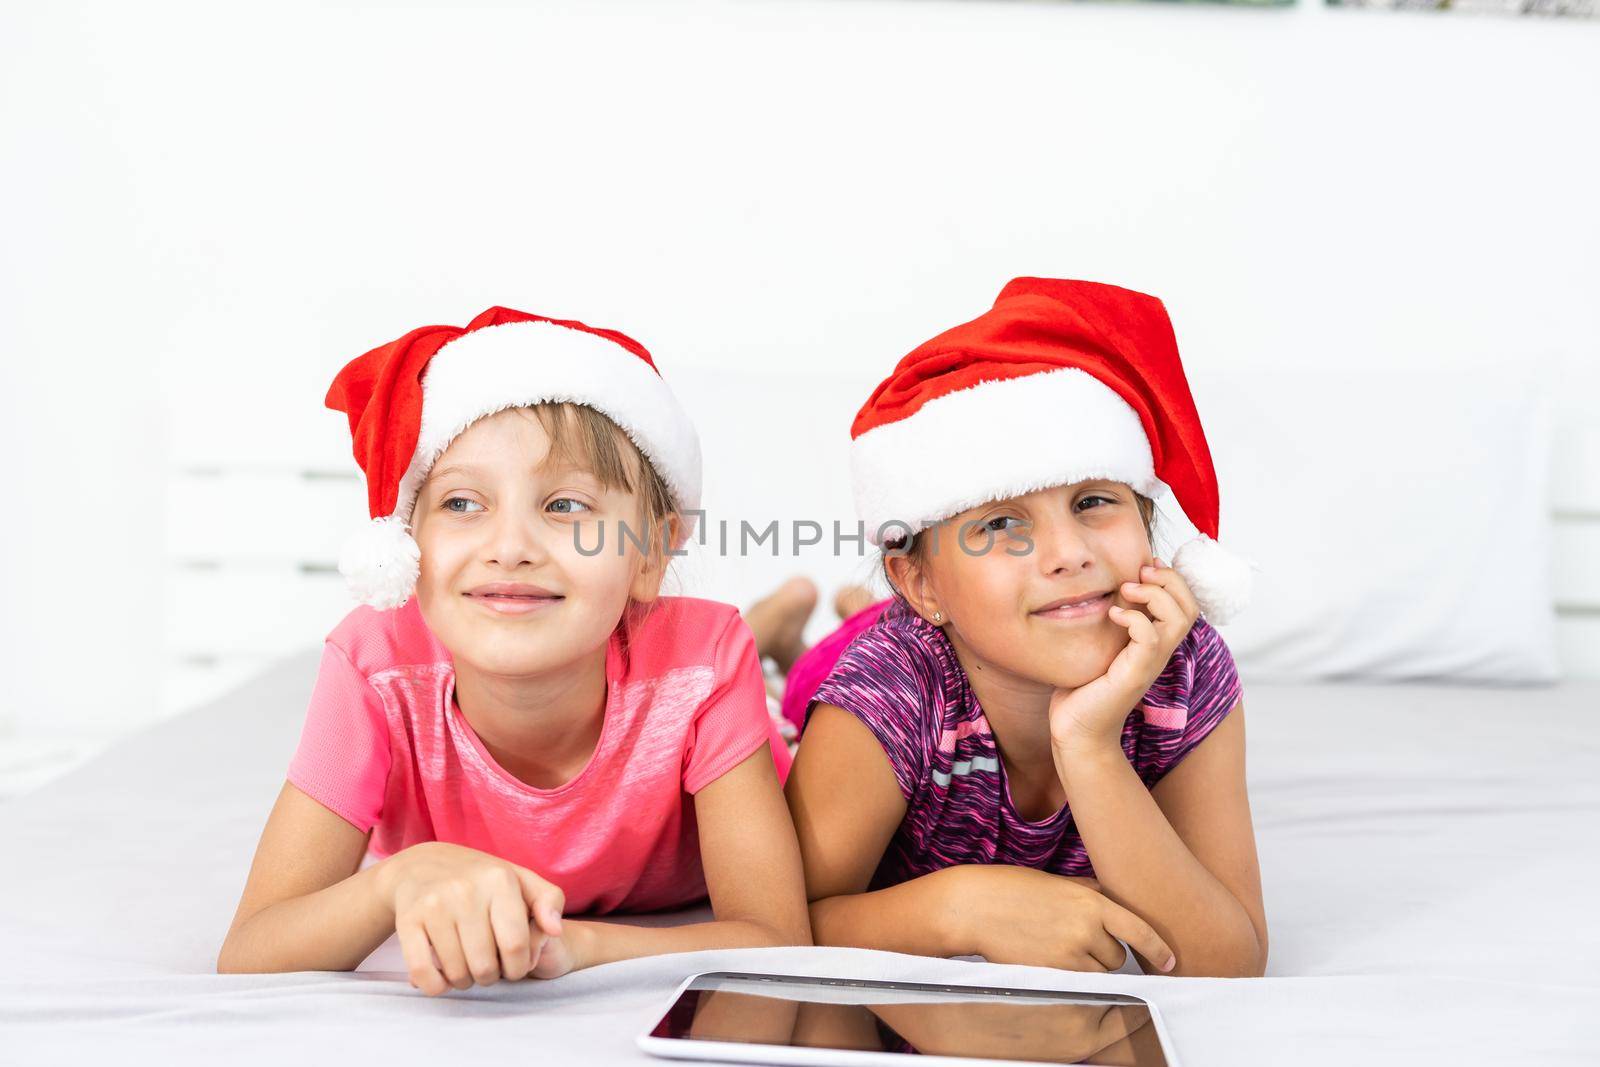 New year concept. christmas, x-mas, winter, happiness concept - two adorable cute girls playing with tablet pc.